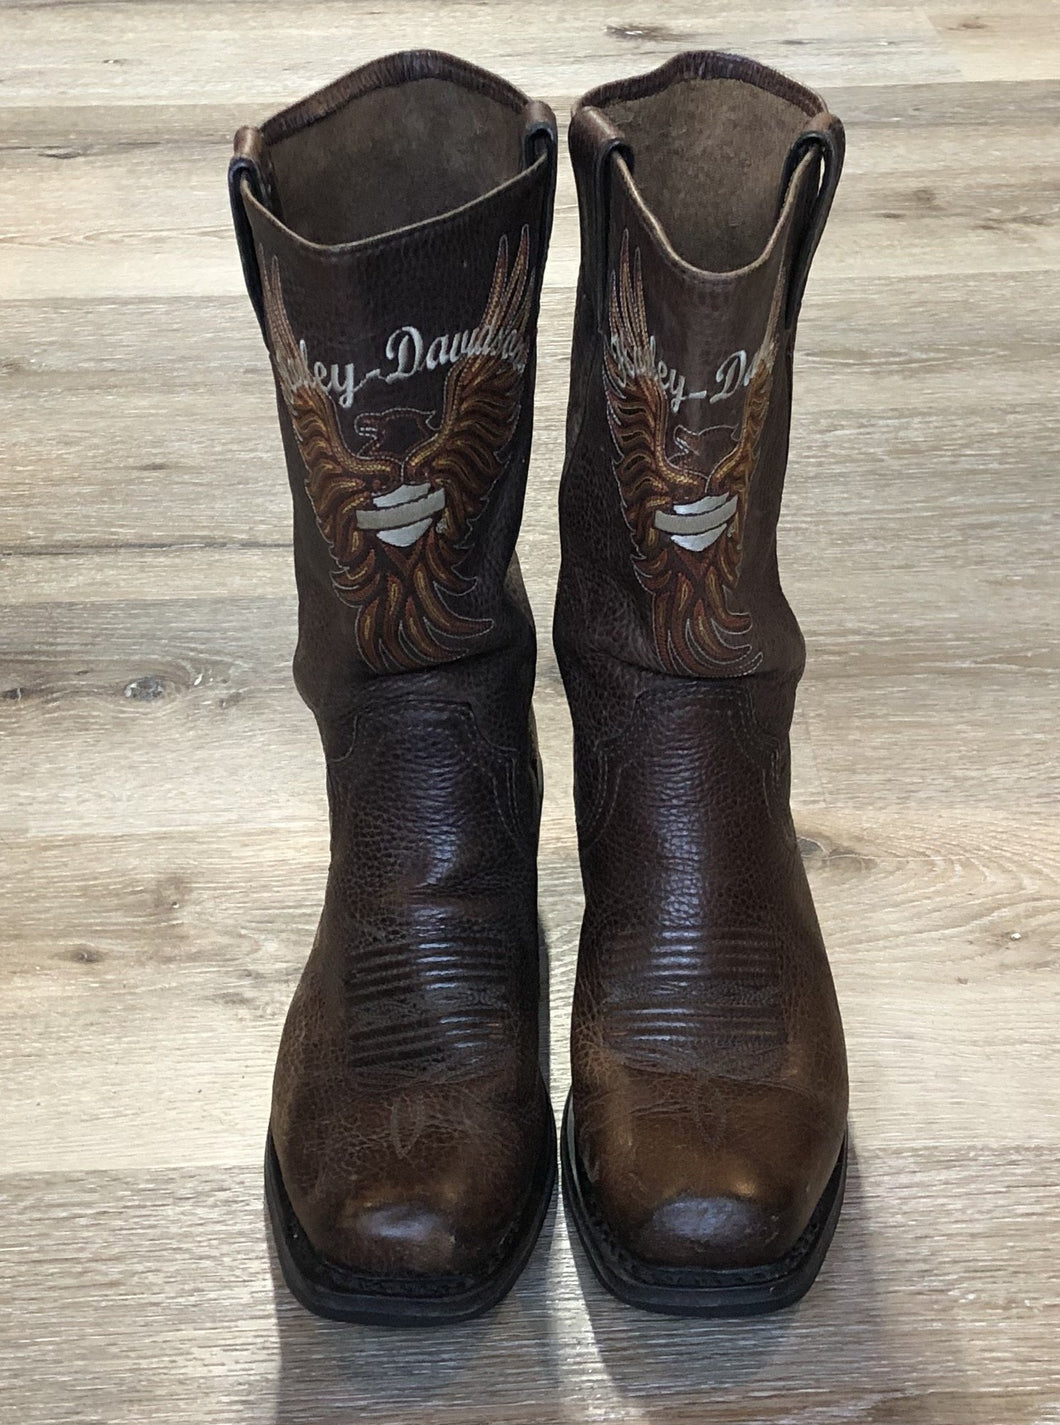 Kingspier Vintage - Harley Davidson mid-calf, pull on western boot in brown pebbled leather with Harley-Davidson embroidered emblem on the front and suede lining. 
 
Size 7 women’s
